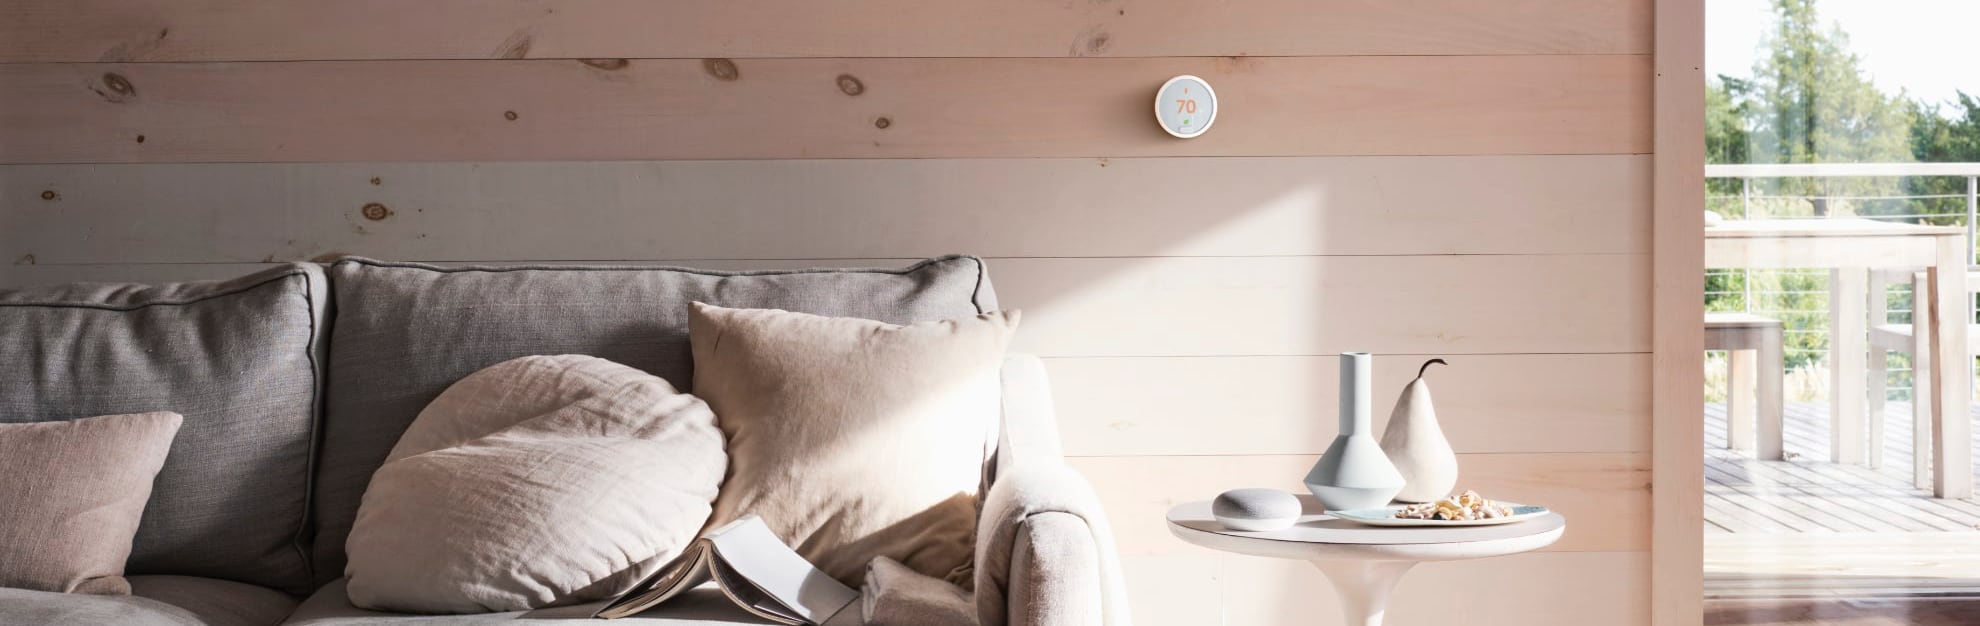 Vivint Home Automation in Jackson